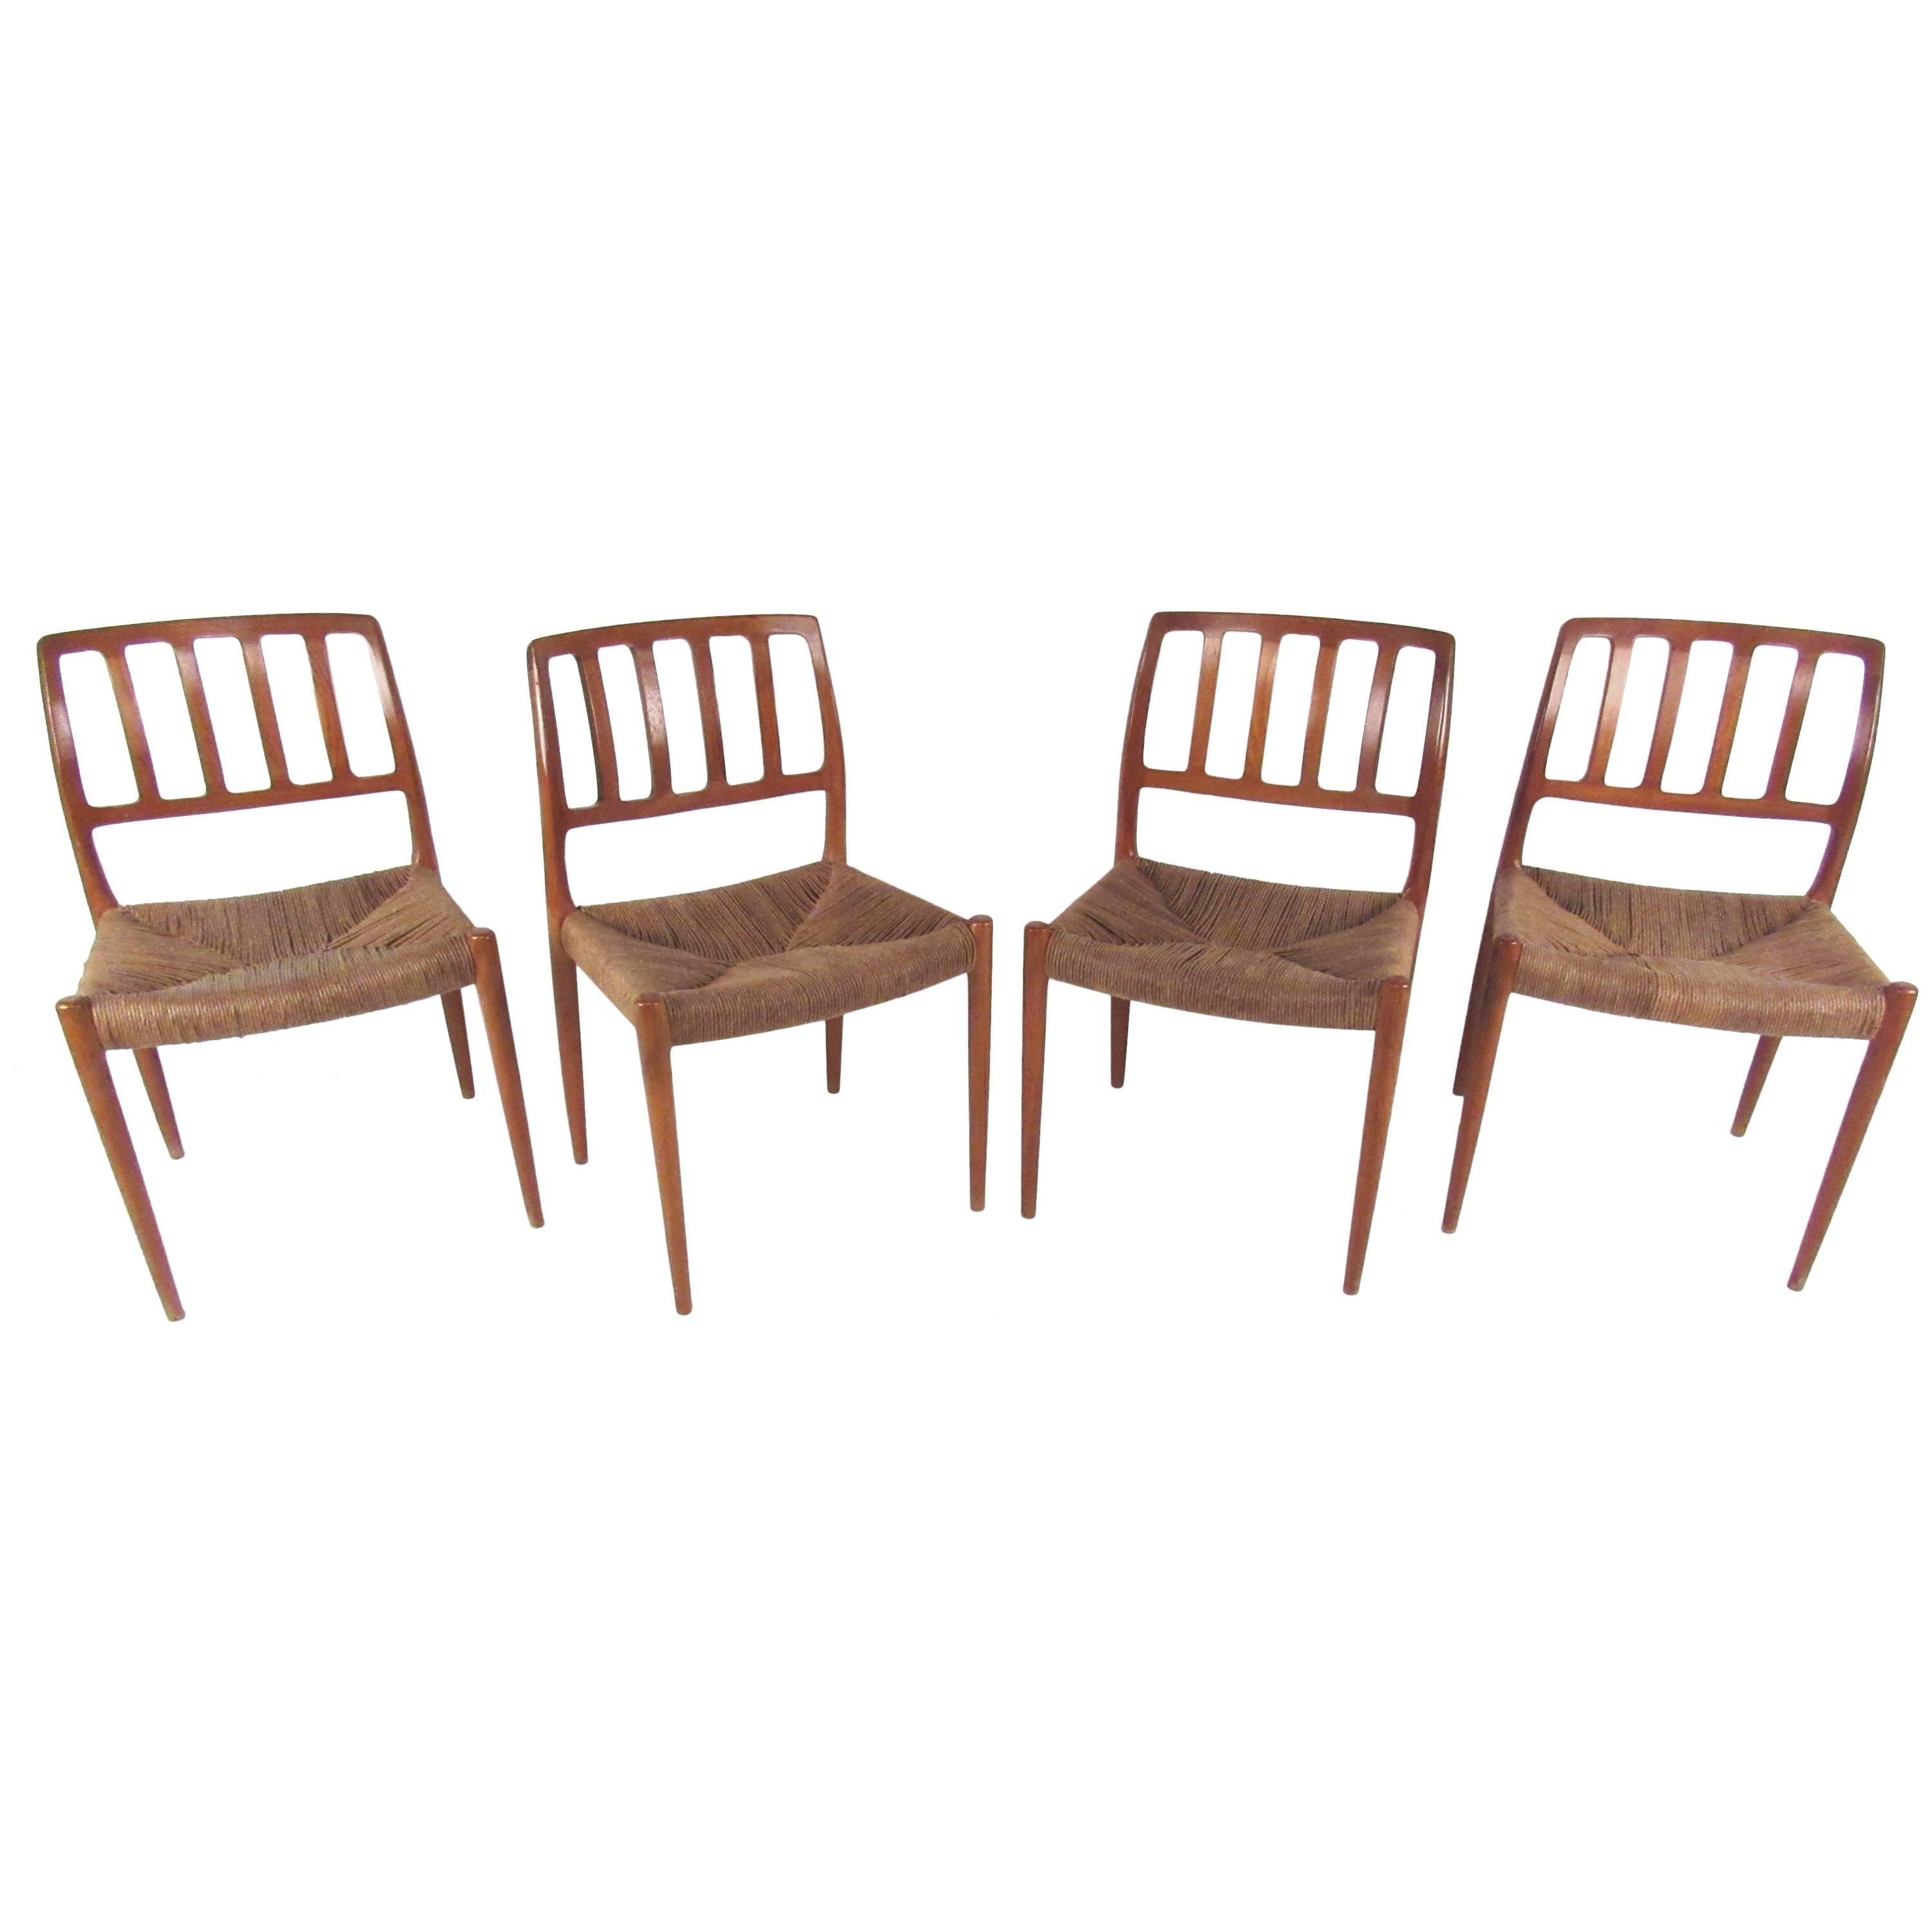 N.O. Møller Teak and Rush Seat Dining Chairs